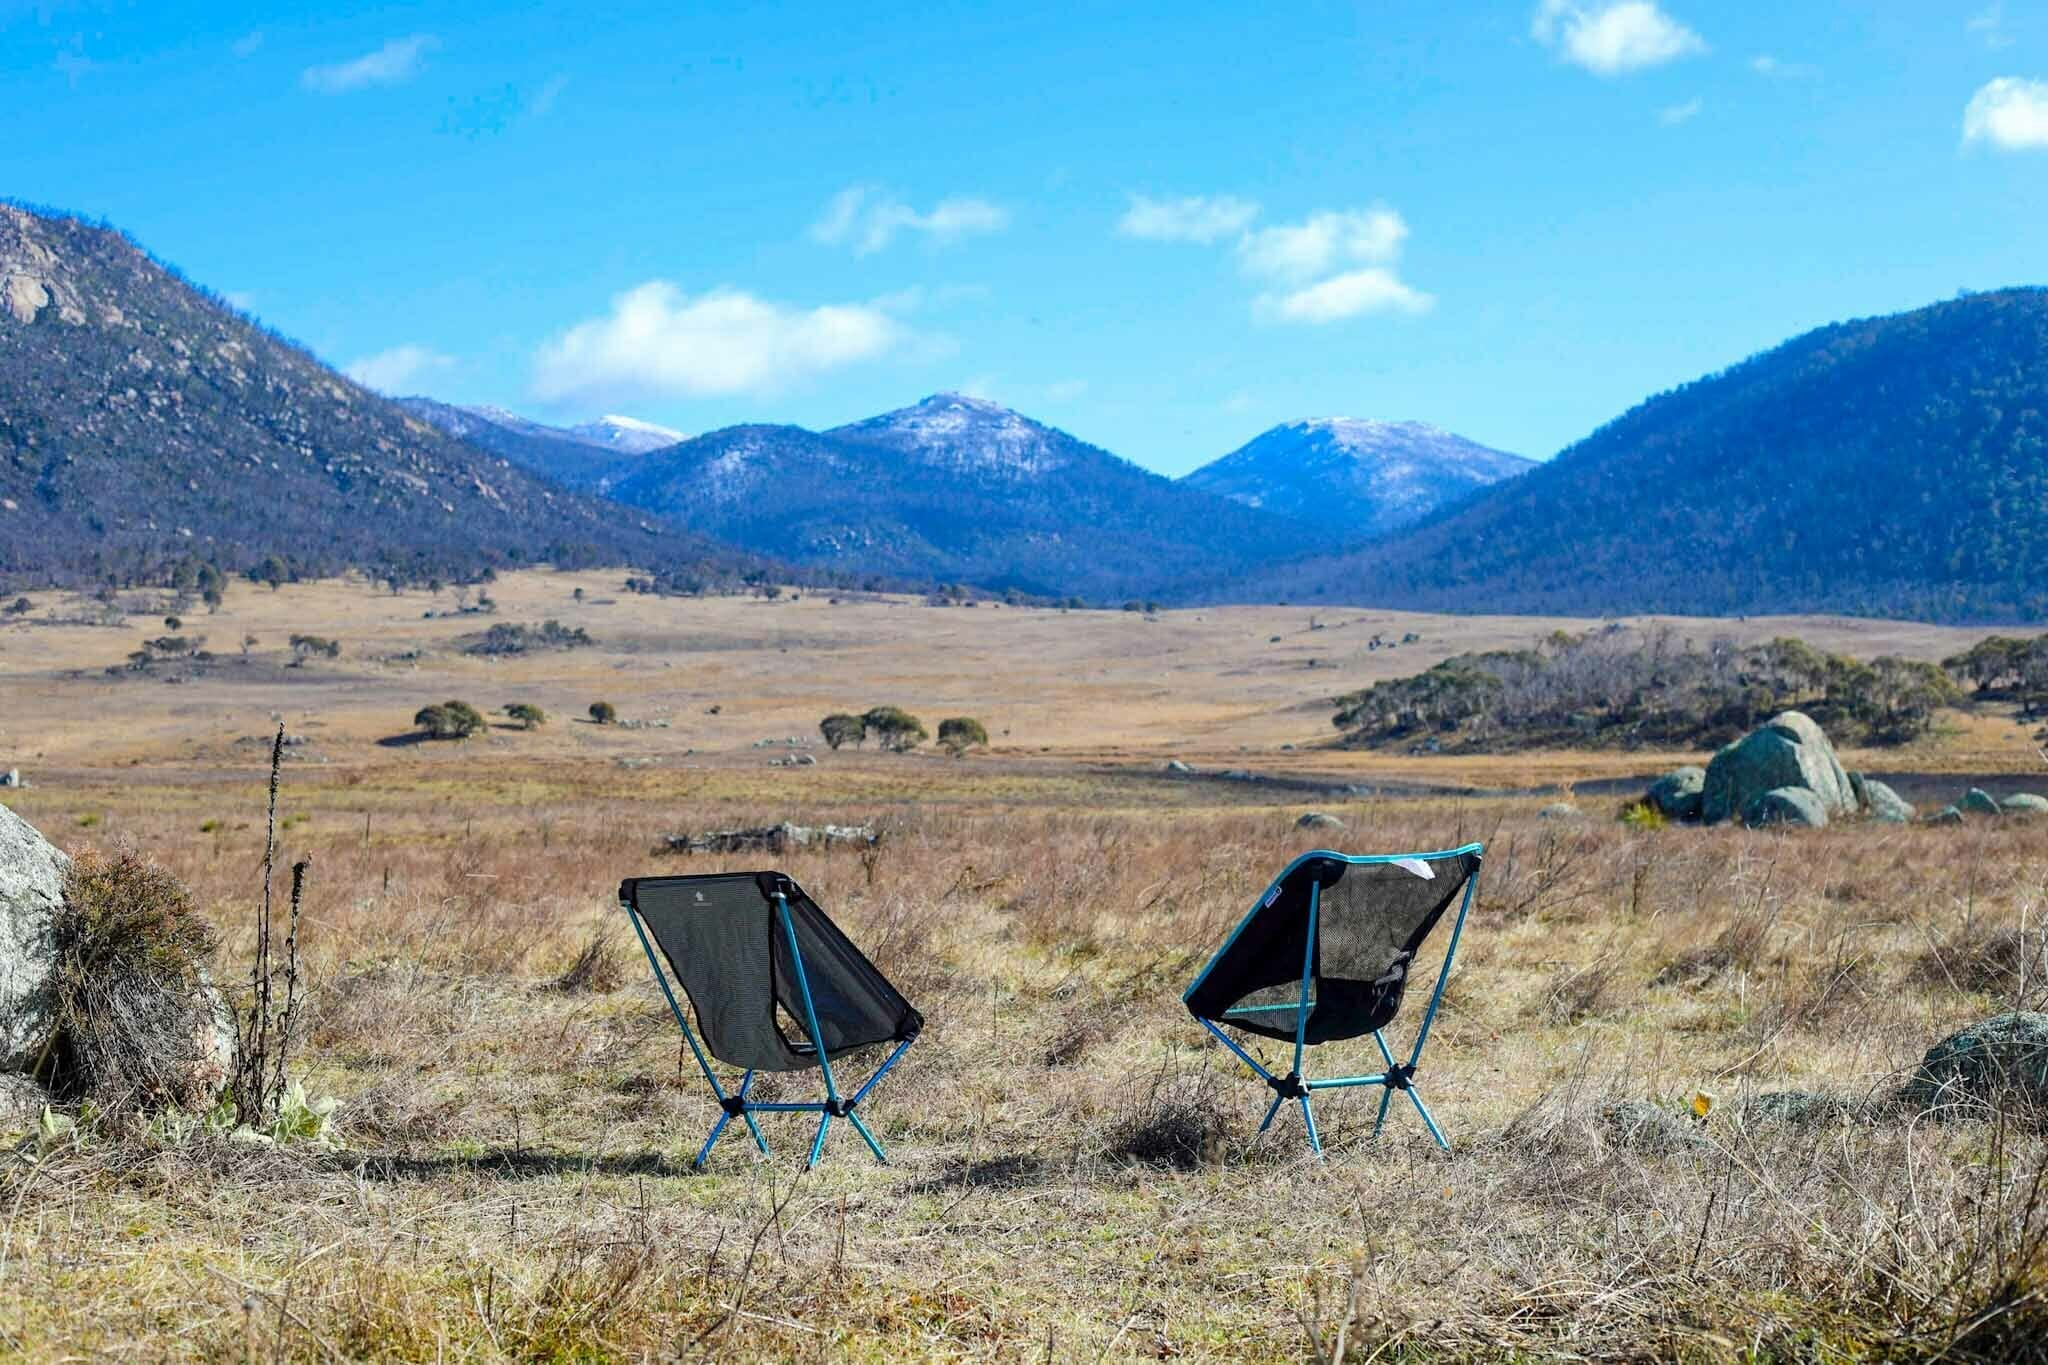 Helinox vs Aldi - Lightweight Camping Chair Comparisons, camping chair